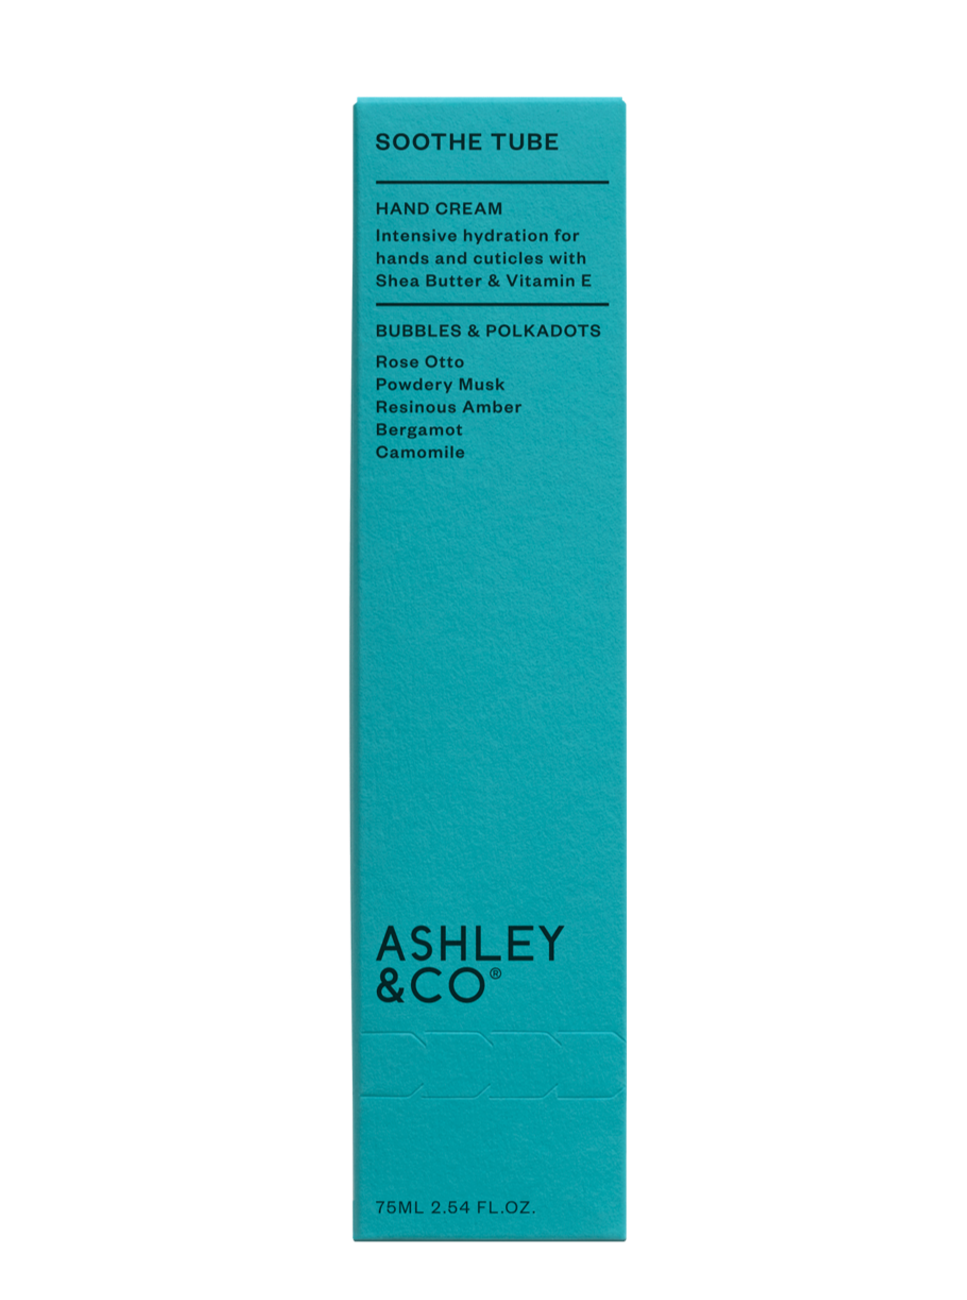 Ashley & Co Soothe Tube Bubbles & Polkadots - packaging